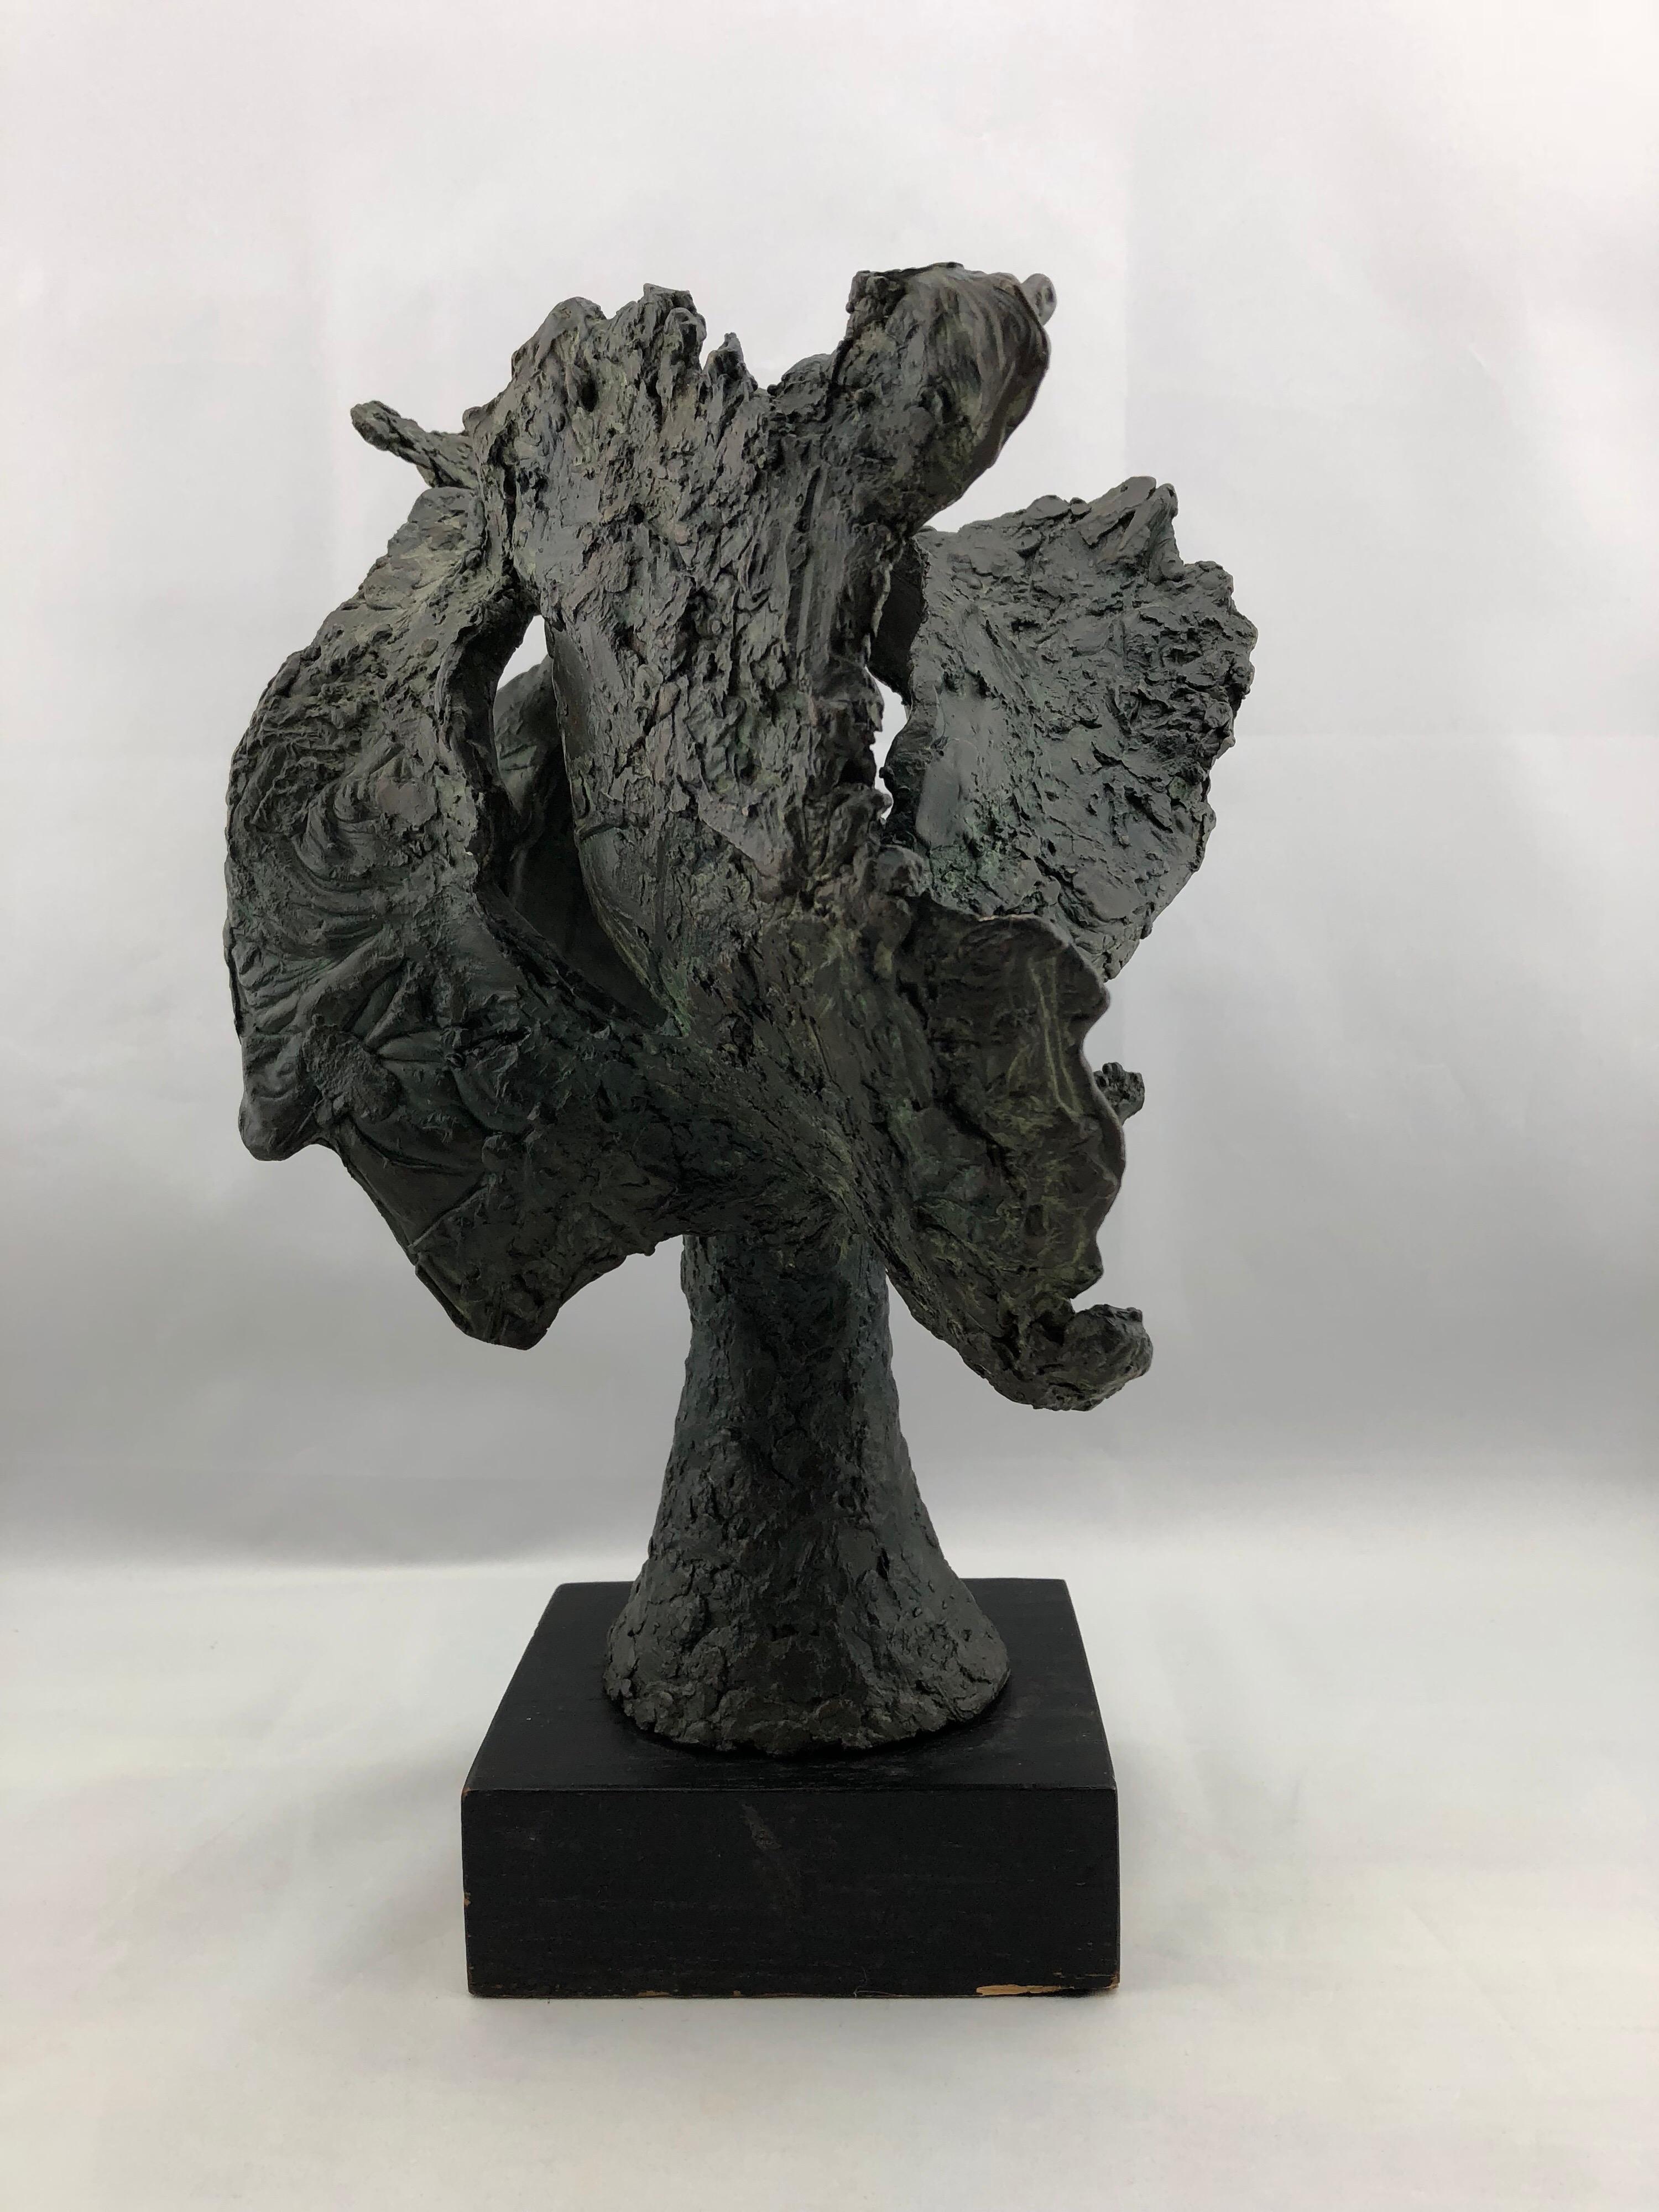 Mid-20th Century Rare Vintage Bronze Sculpture by Artist John Begg, Signed and Numbered 1 of 1